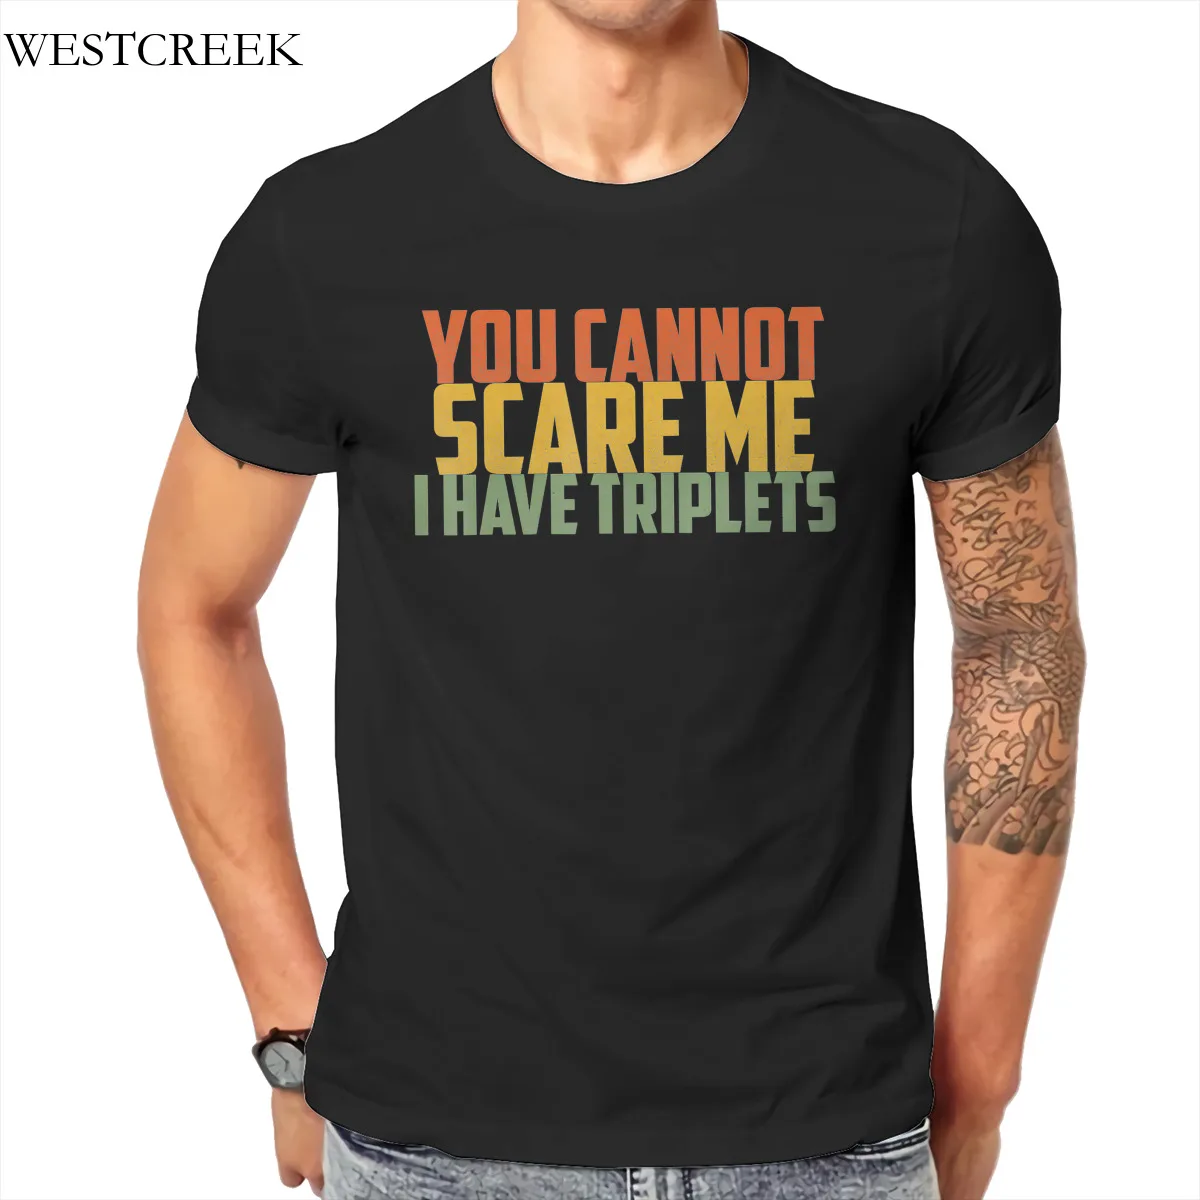 

WESTCREEK Wholesale You Cannot Scare Me I Have Triplets Vintage Essentials Funny Couples Round Collar 2021 Men's T-Shirts 167321